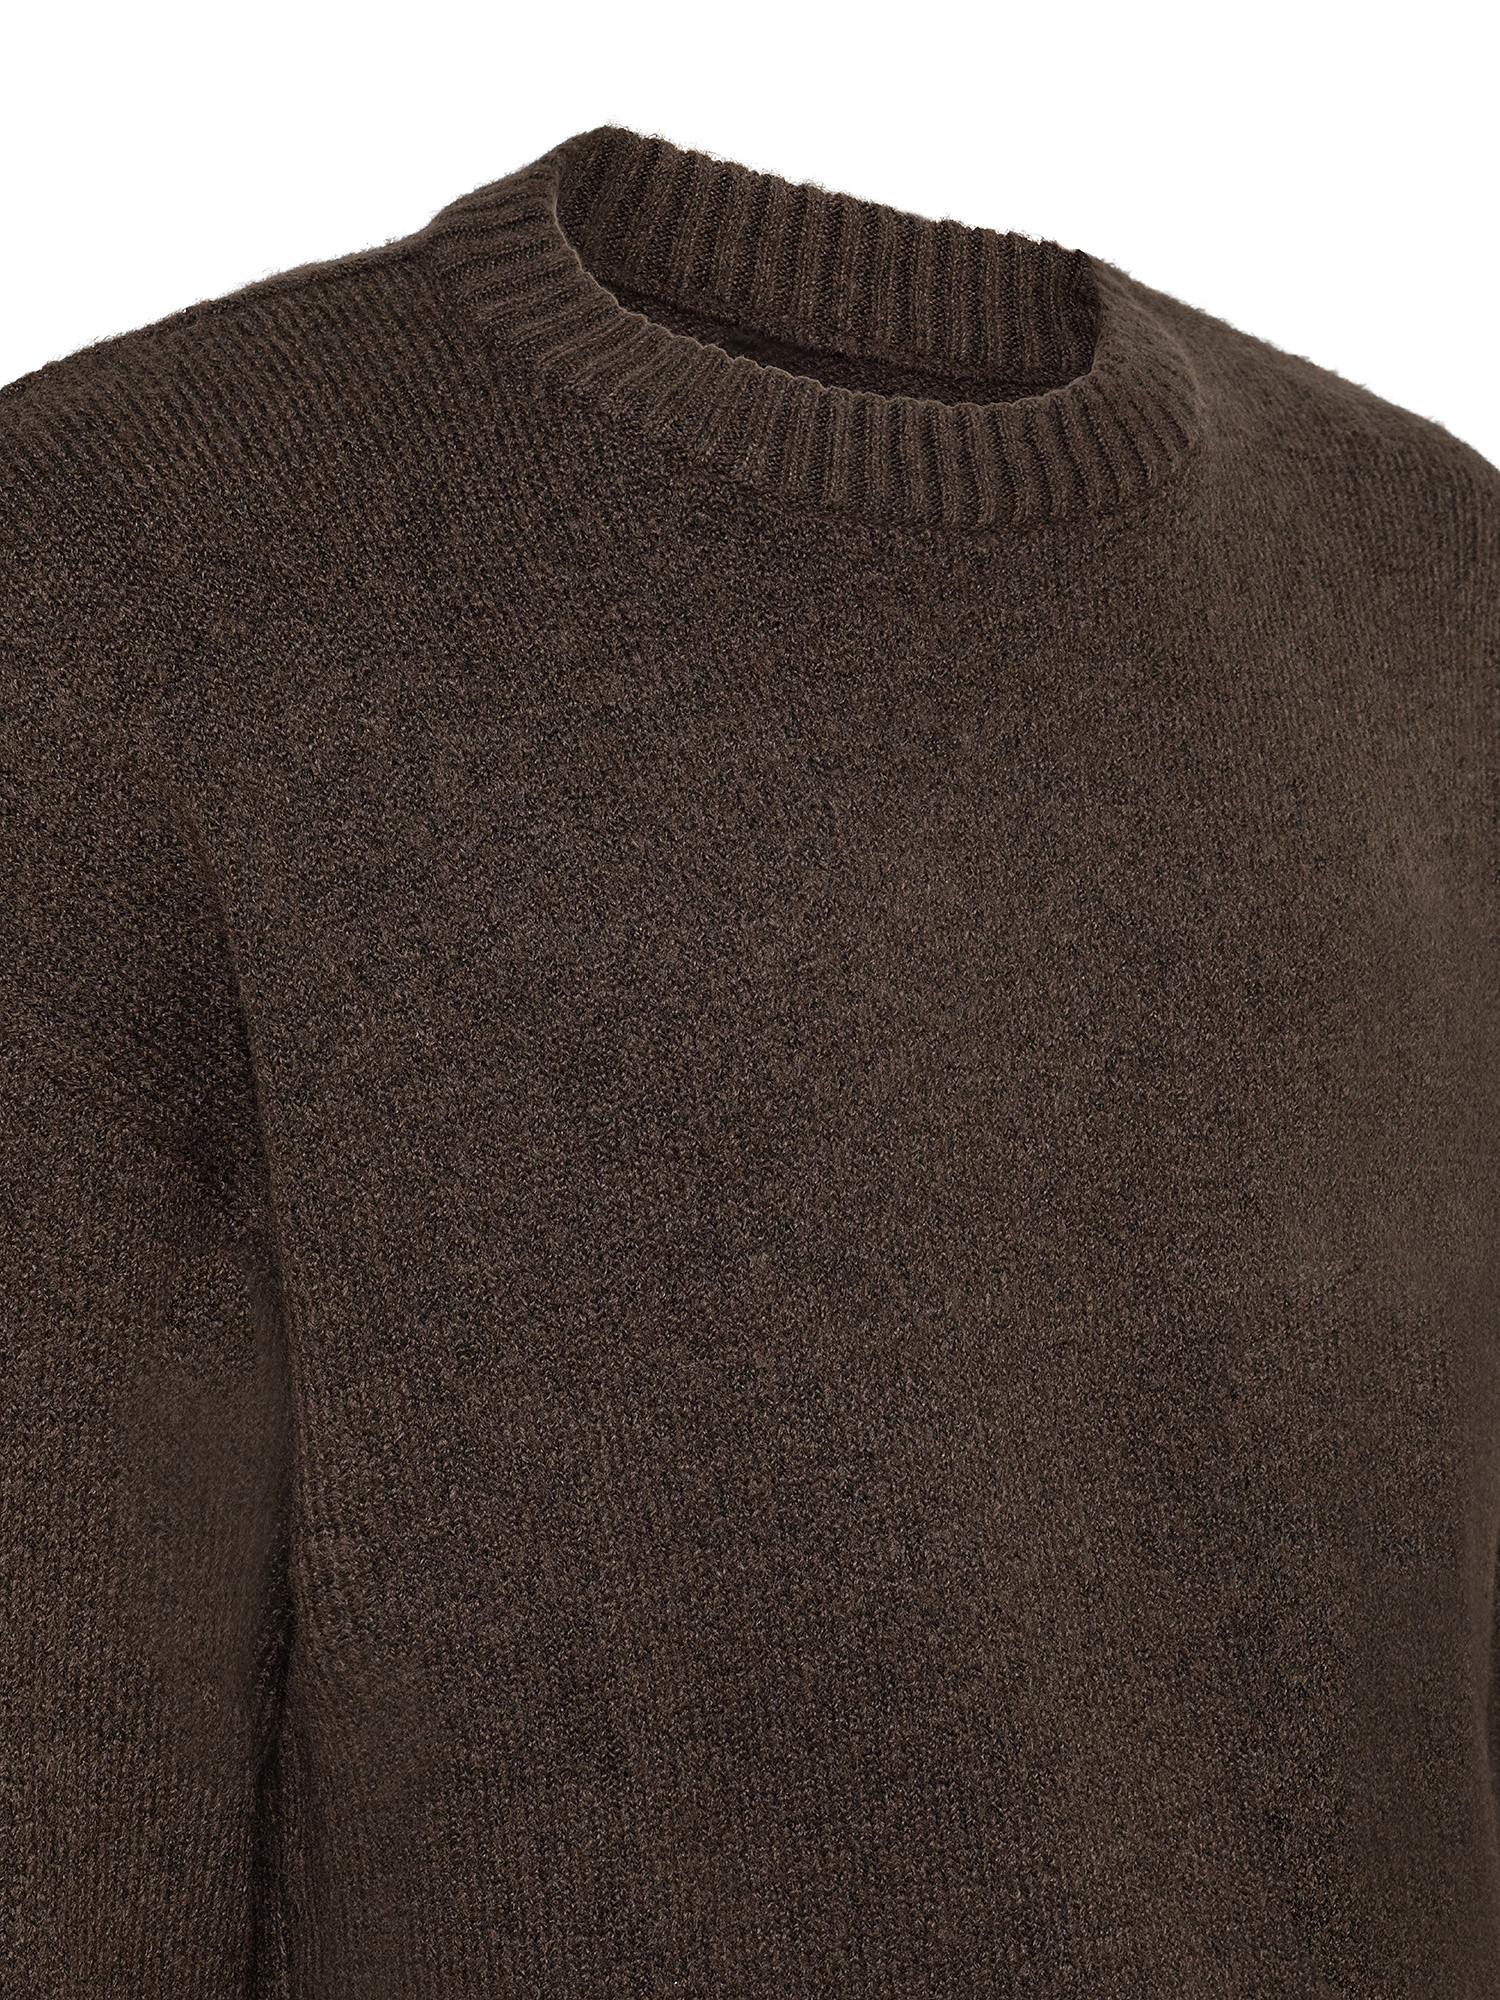 Pullover with long sleeves, Brown, large image number 2